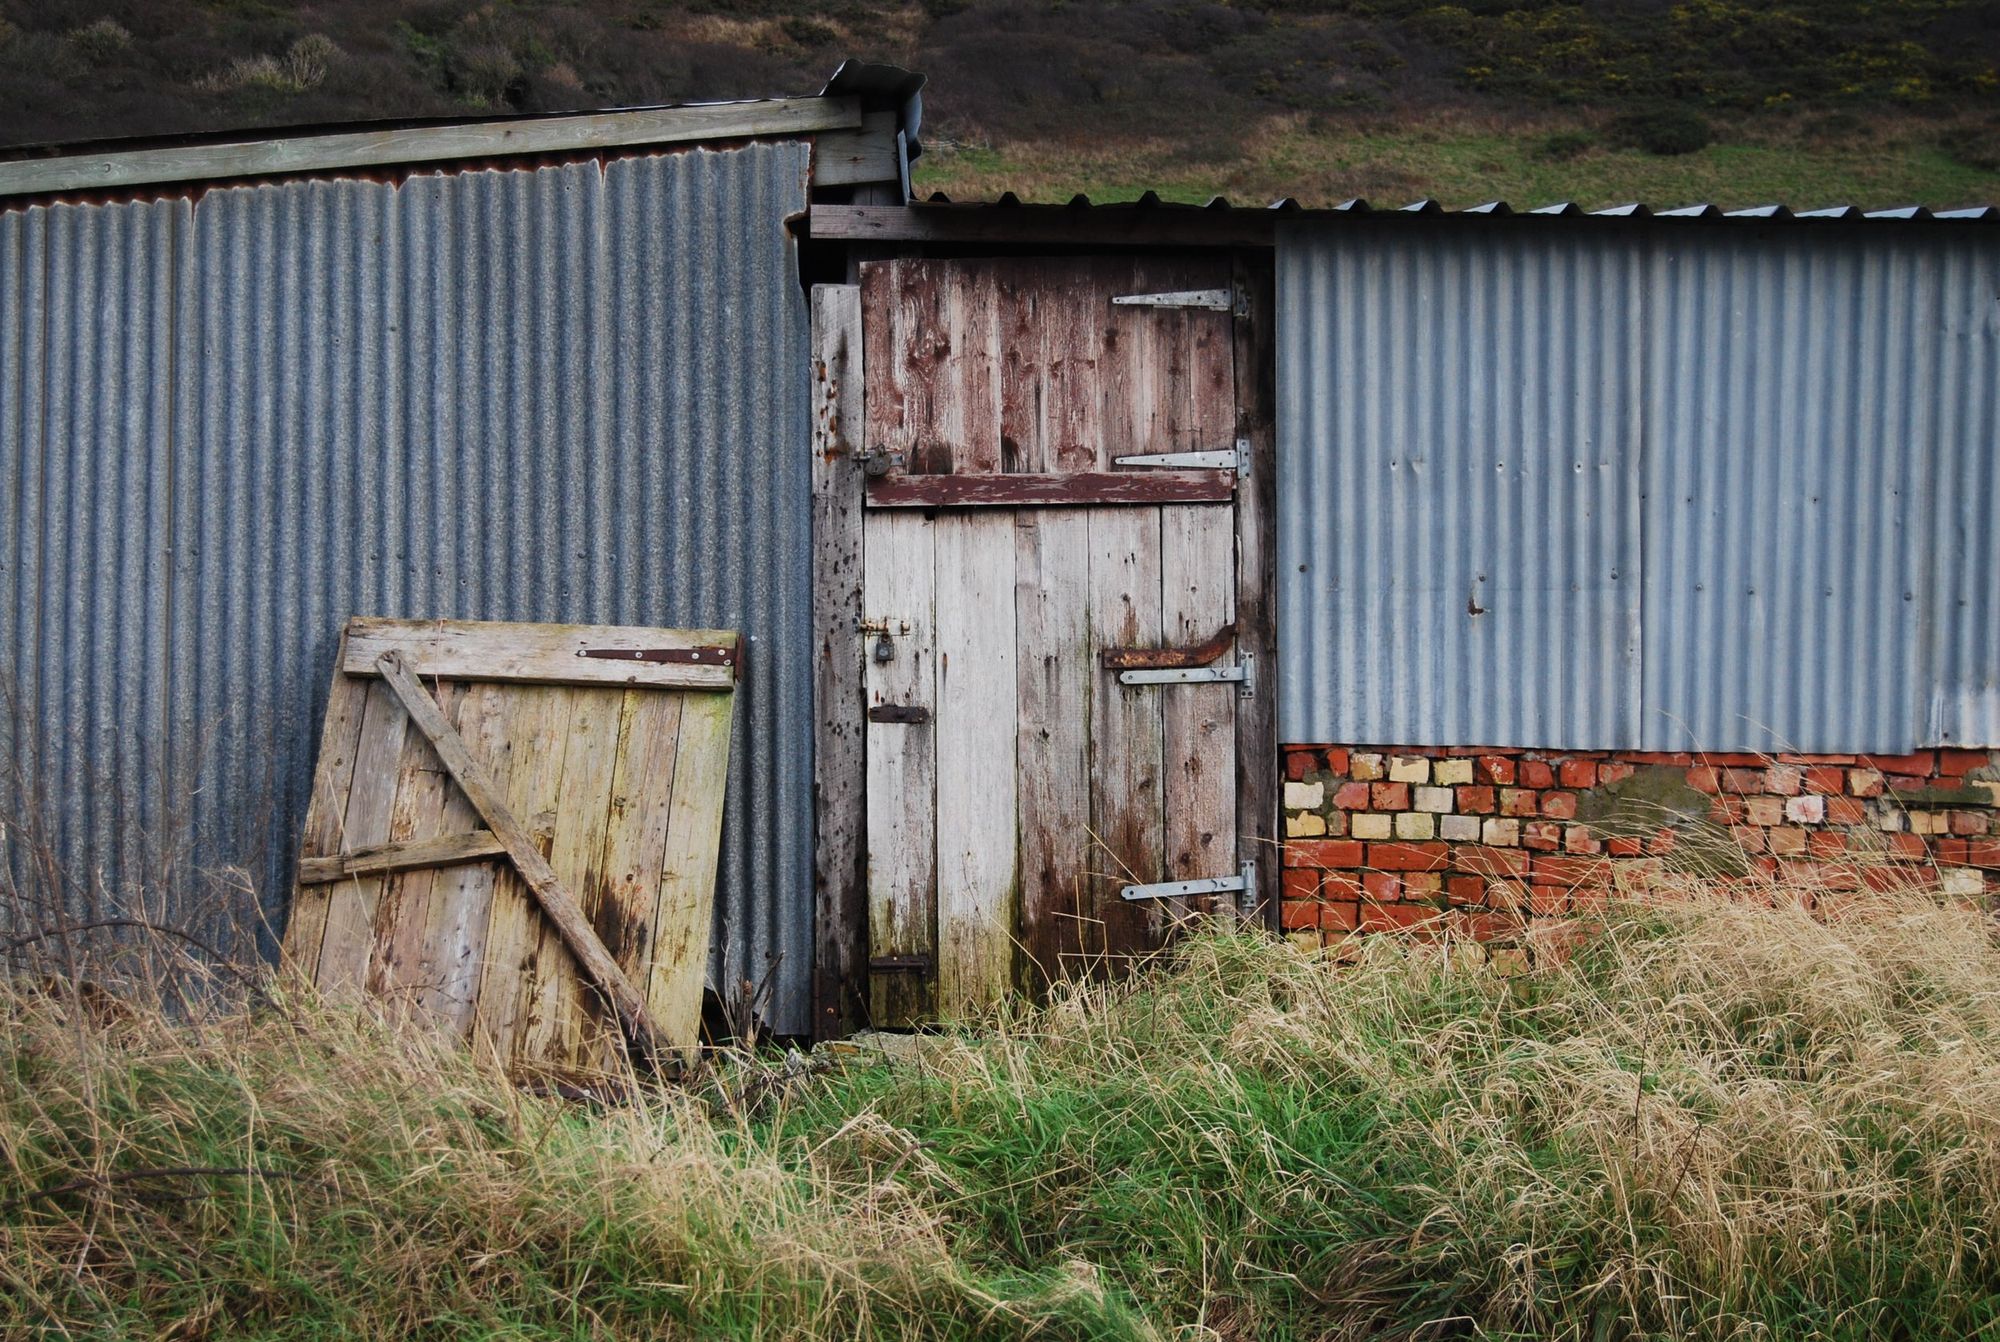 A photo of a tin shed in Wales with overgrown grass in front, and red bricks.